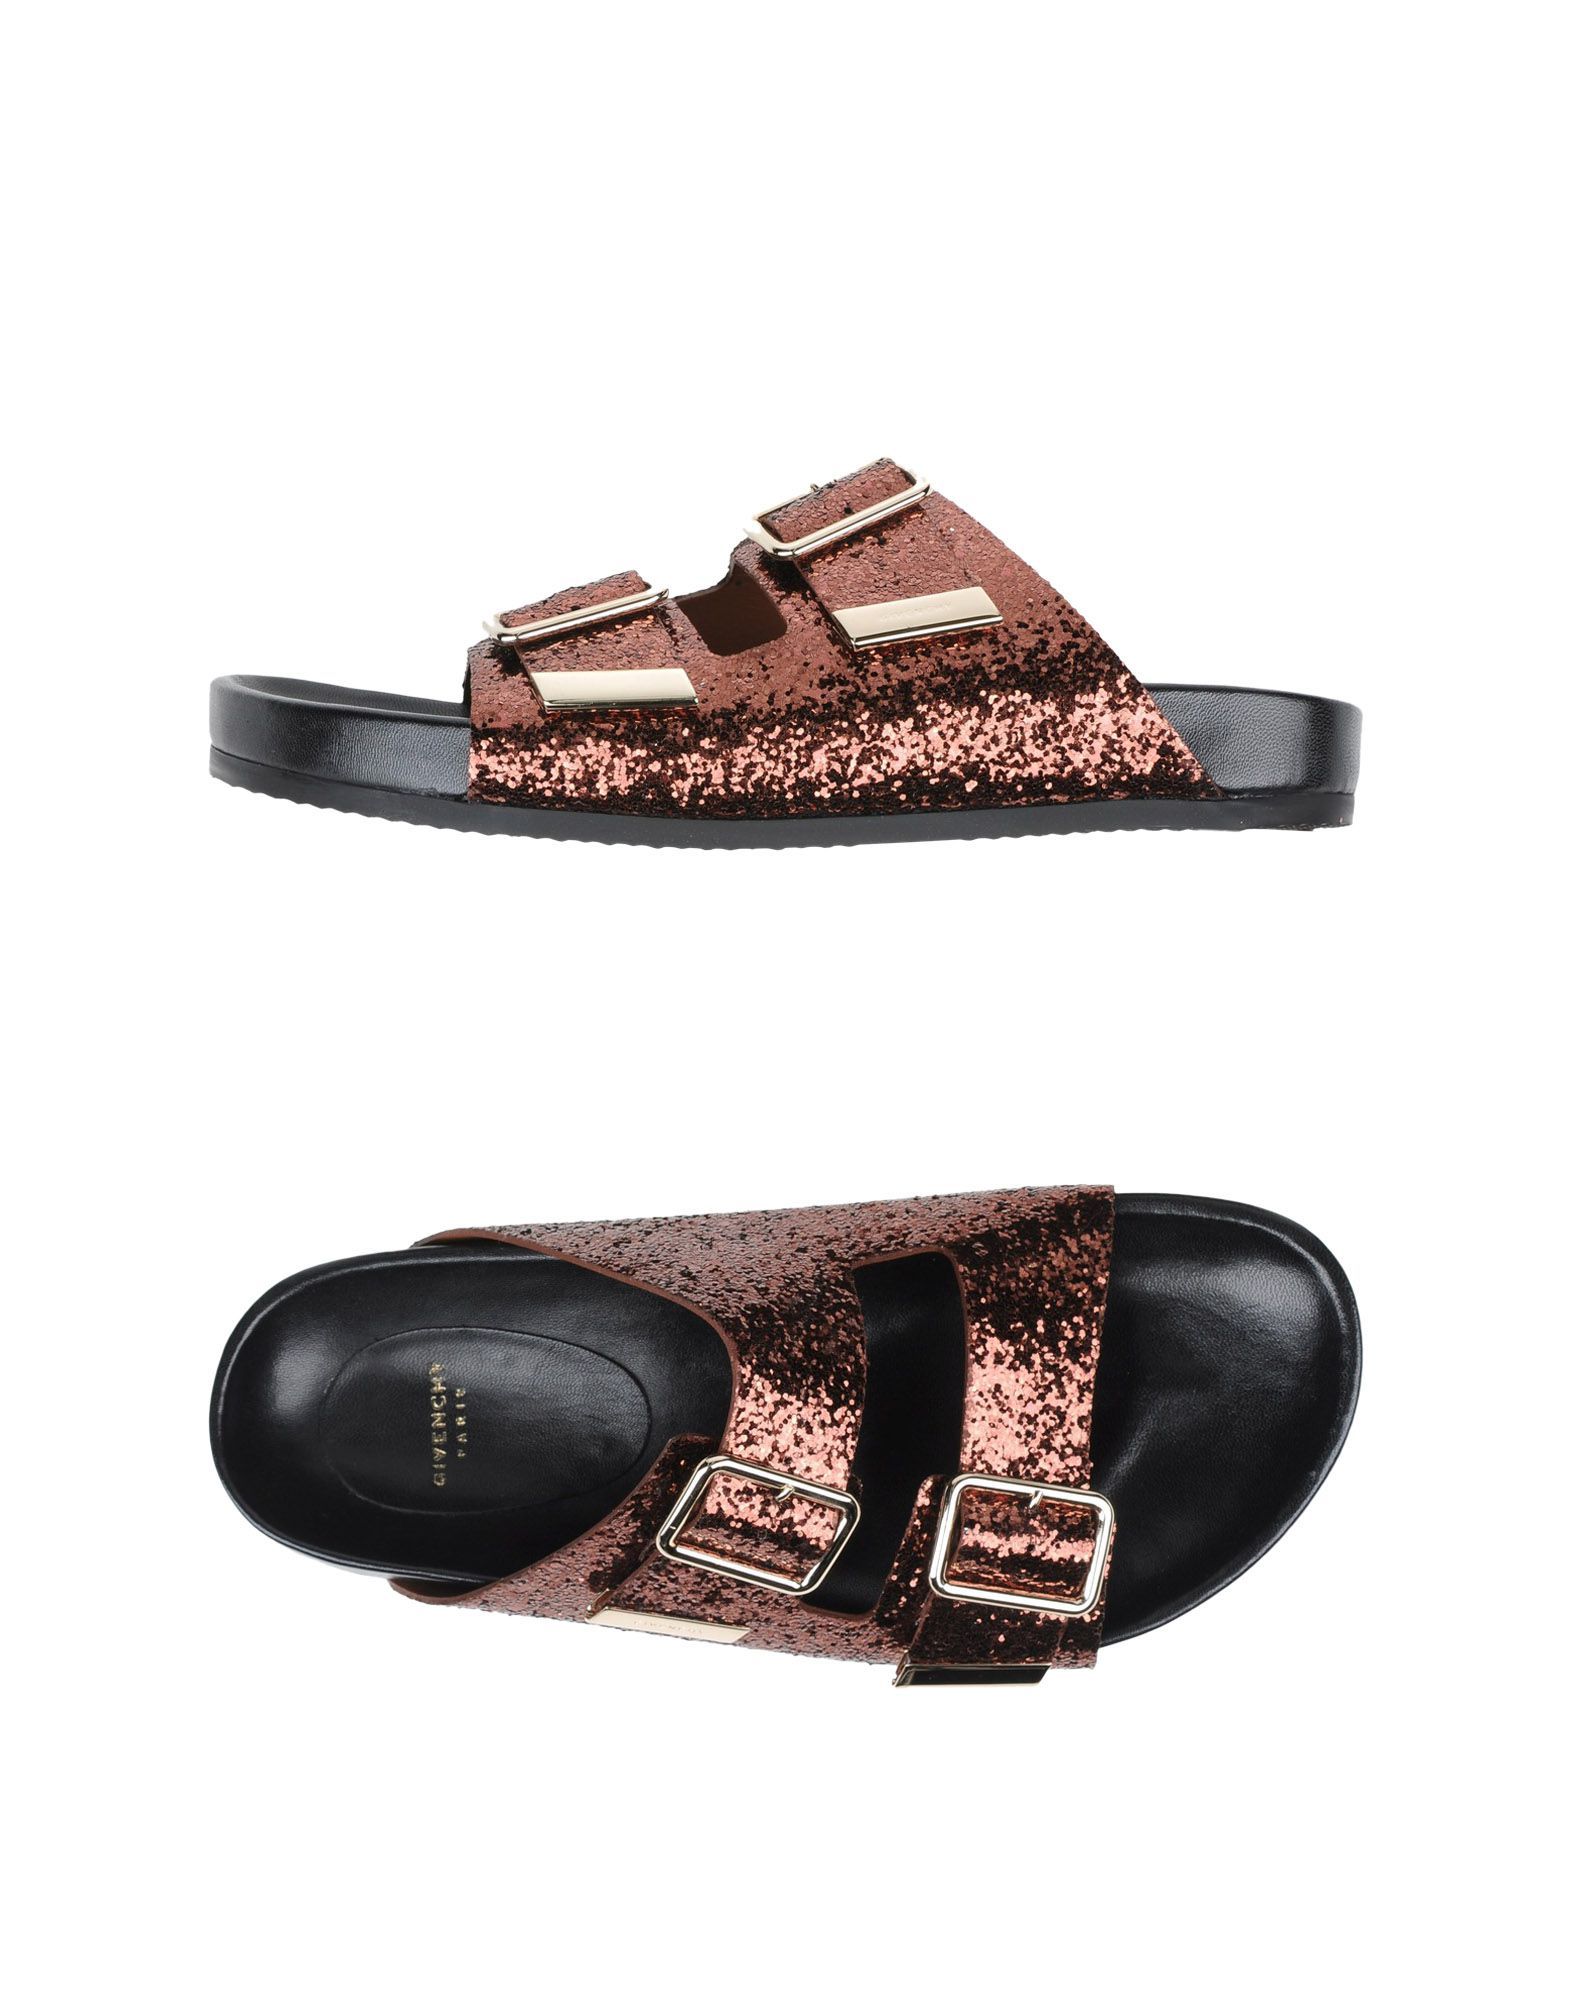 GIVENCHY Sandals | YOOX (US)